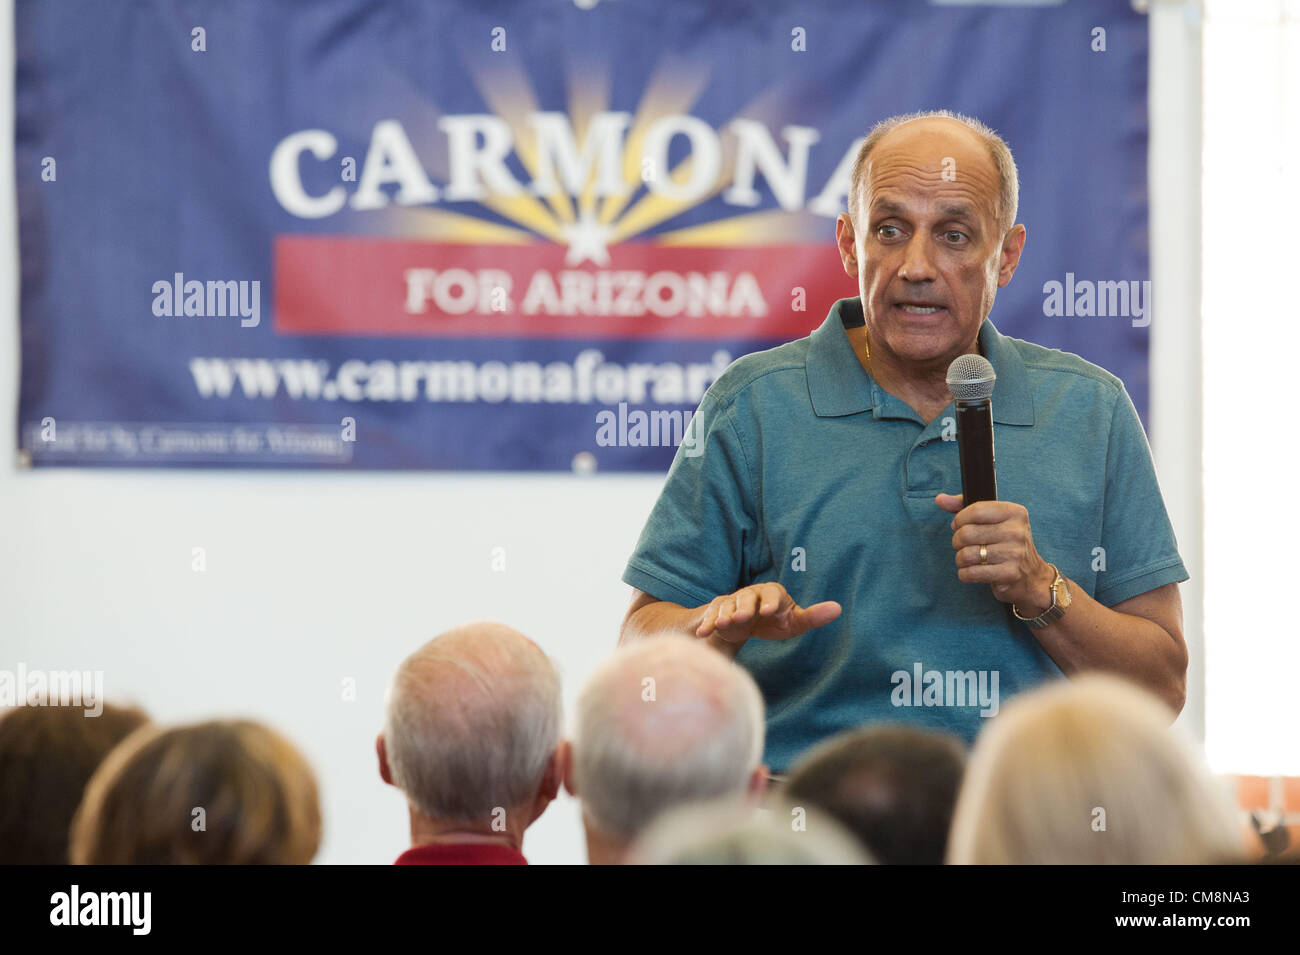 Oct. 28, 2012 - Tucson, Arizona, U.S. - RICHARD CARMONA, the Democratic candidate for Arizona's open Senate seat, campaigns at a midtown high school in Tucson, Ariz. leading into the final week of the 2012 election cycle.  Carmona championed his political moderation, and blamed the Flake campaign and associated PACs for the ad-driven smear campaign that has heated up over the last few weeks.  Recent polls show the once long-shot candidate neck-and-neck with the GOP candidate Rep. J. Flake (R-Ariz.) (Credit Image: © Will Seberger/ZUMAPRESS.com) Stock Photo